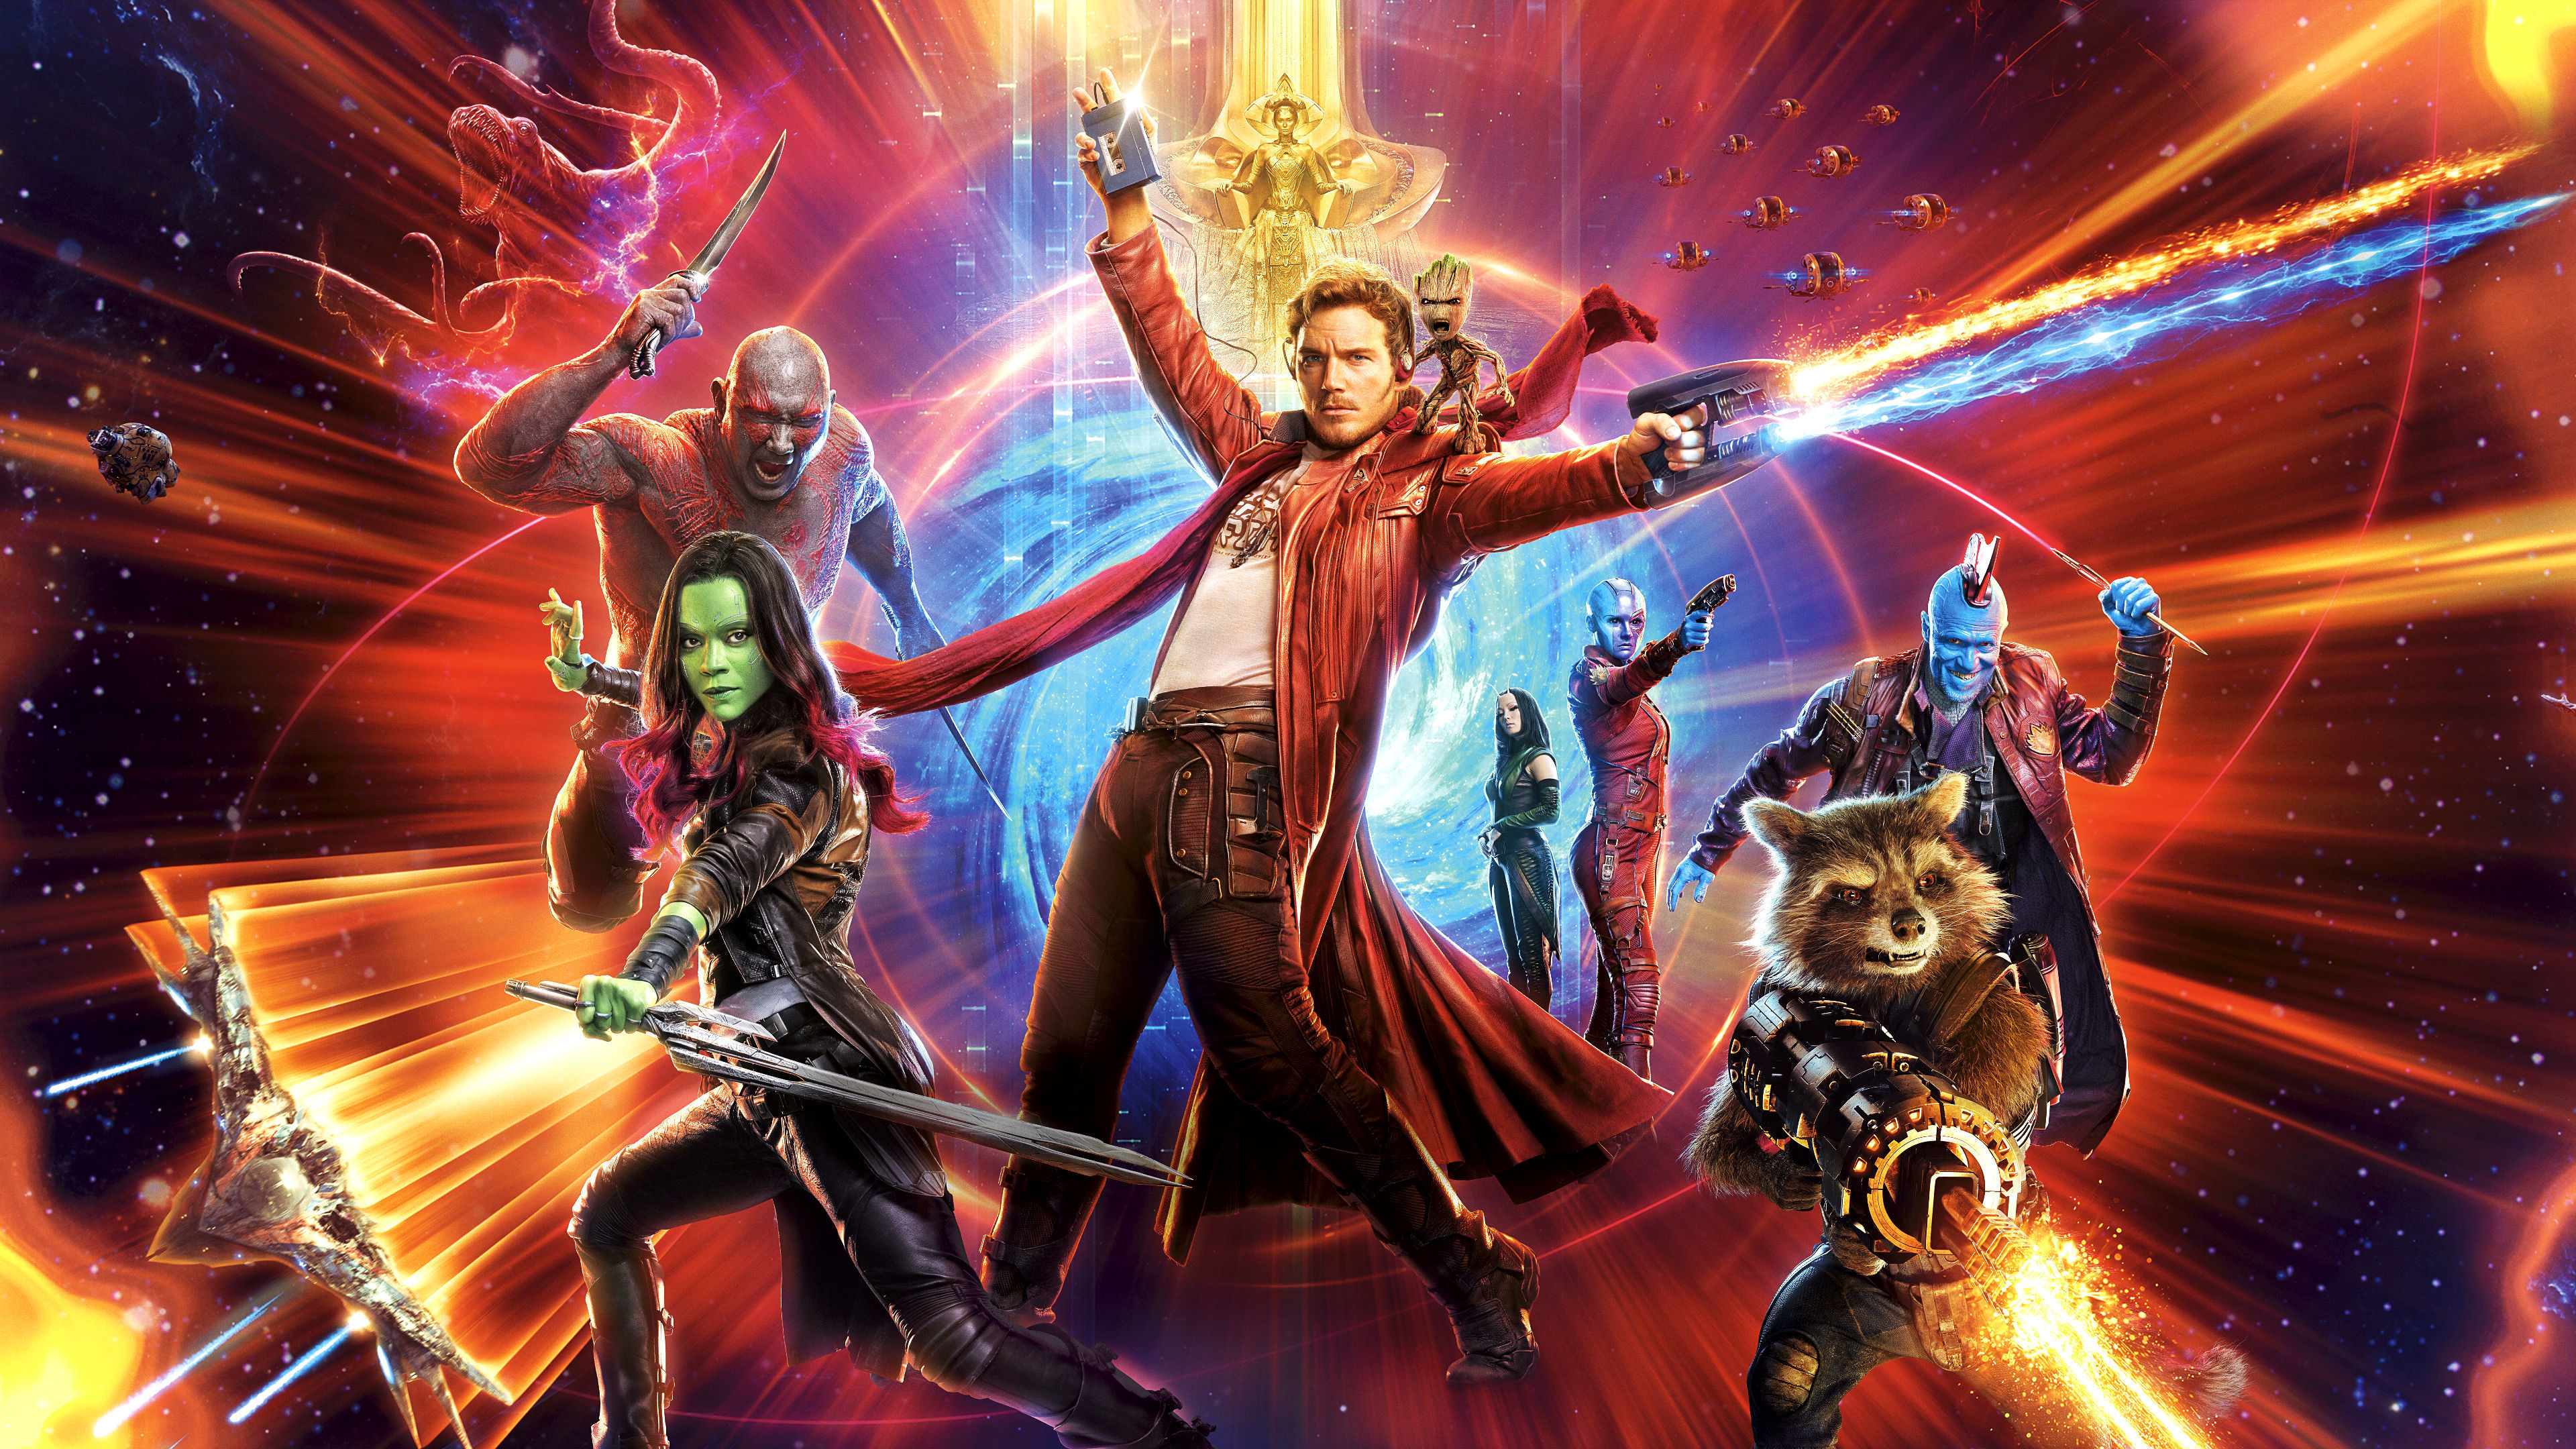 for ios download Guardians of the Galaxy Vol 3